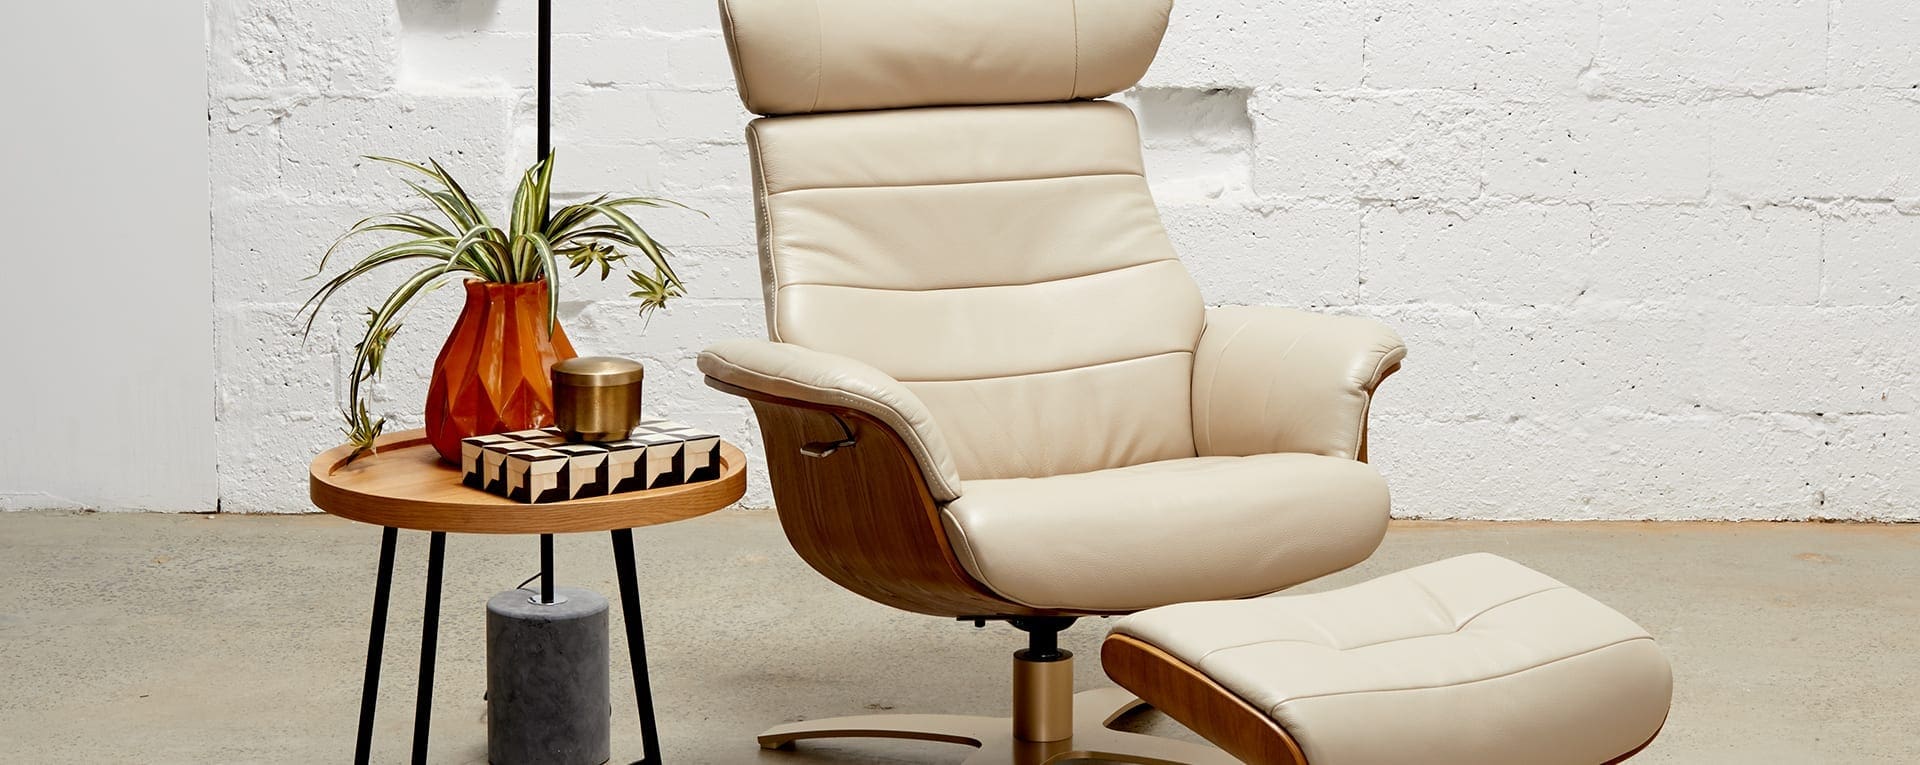 Buy Leather & Fabric Occasional Chairs Online in Melbourne